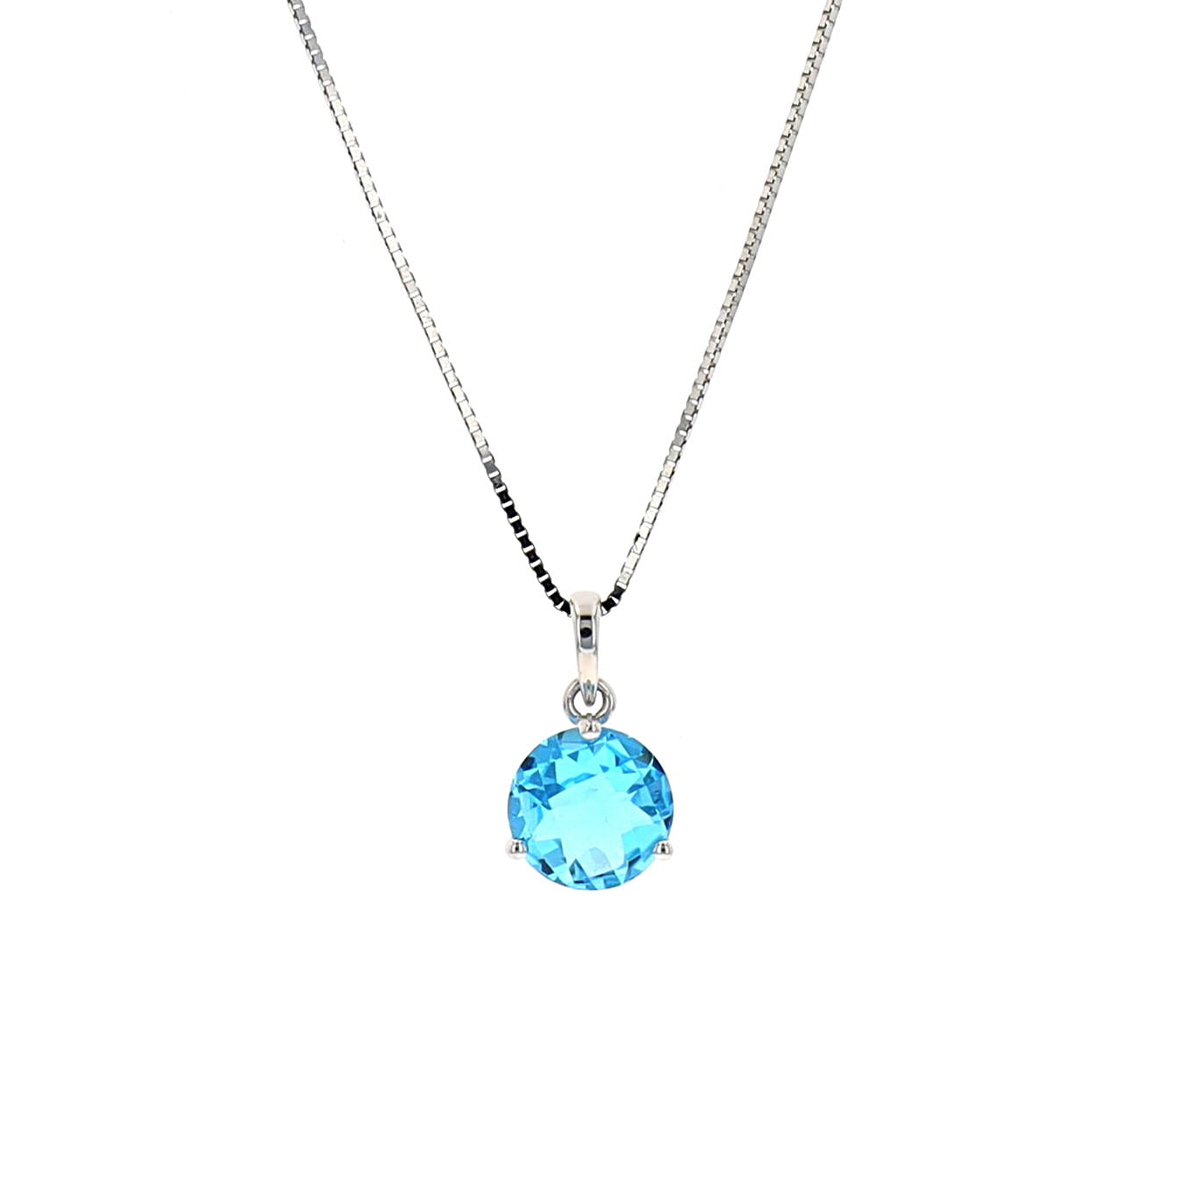 14K White Gold Blue Topaz Pendant with Chain